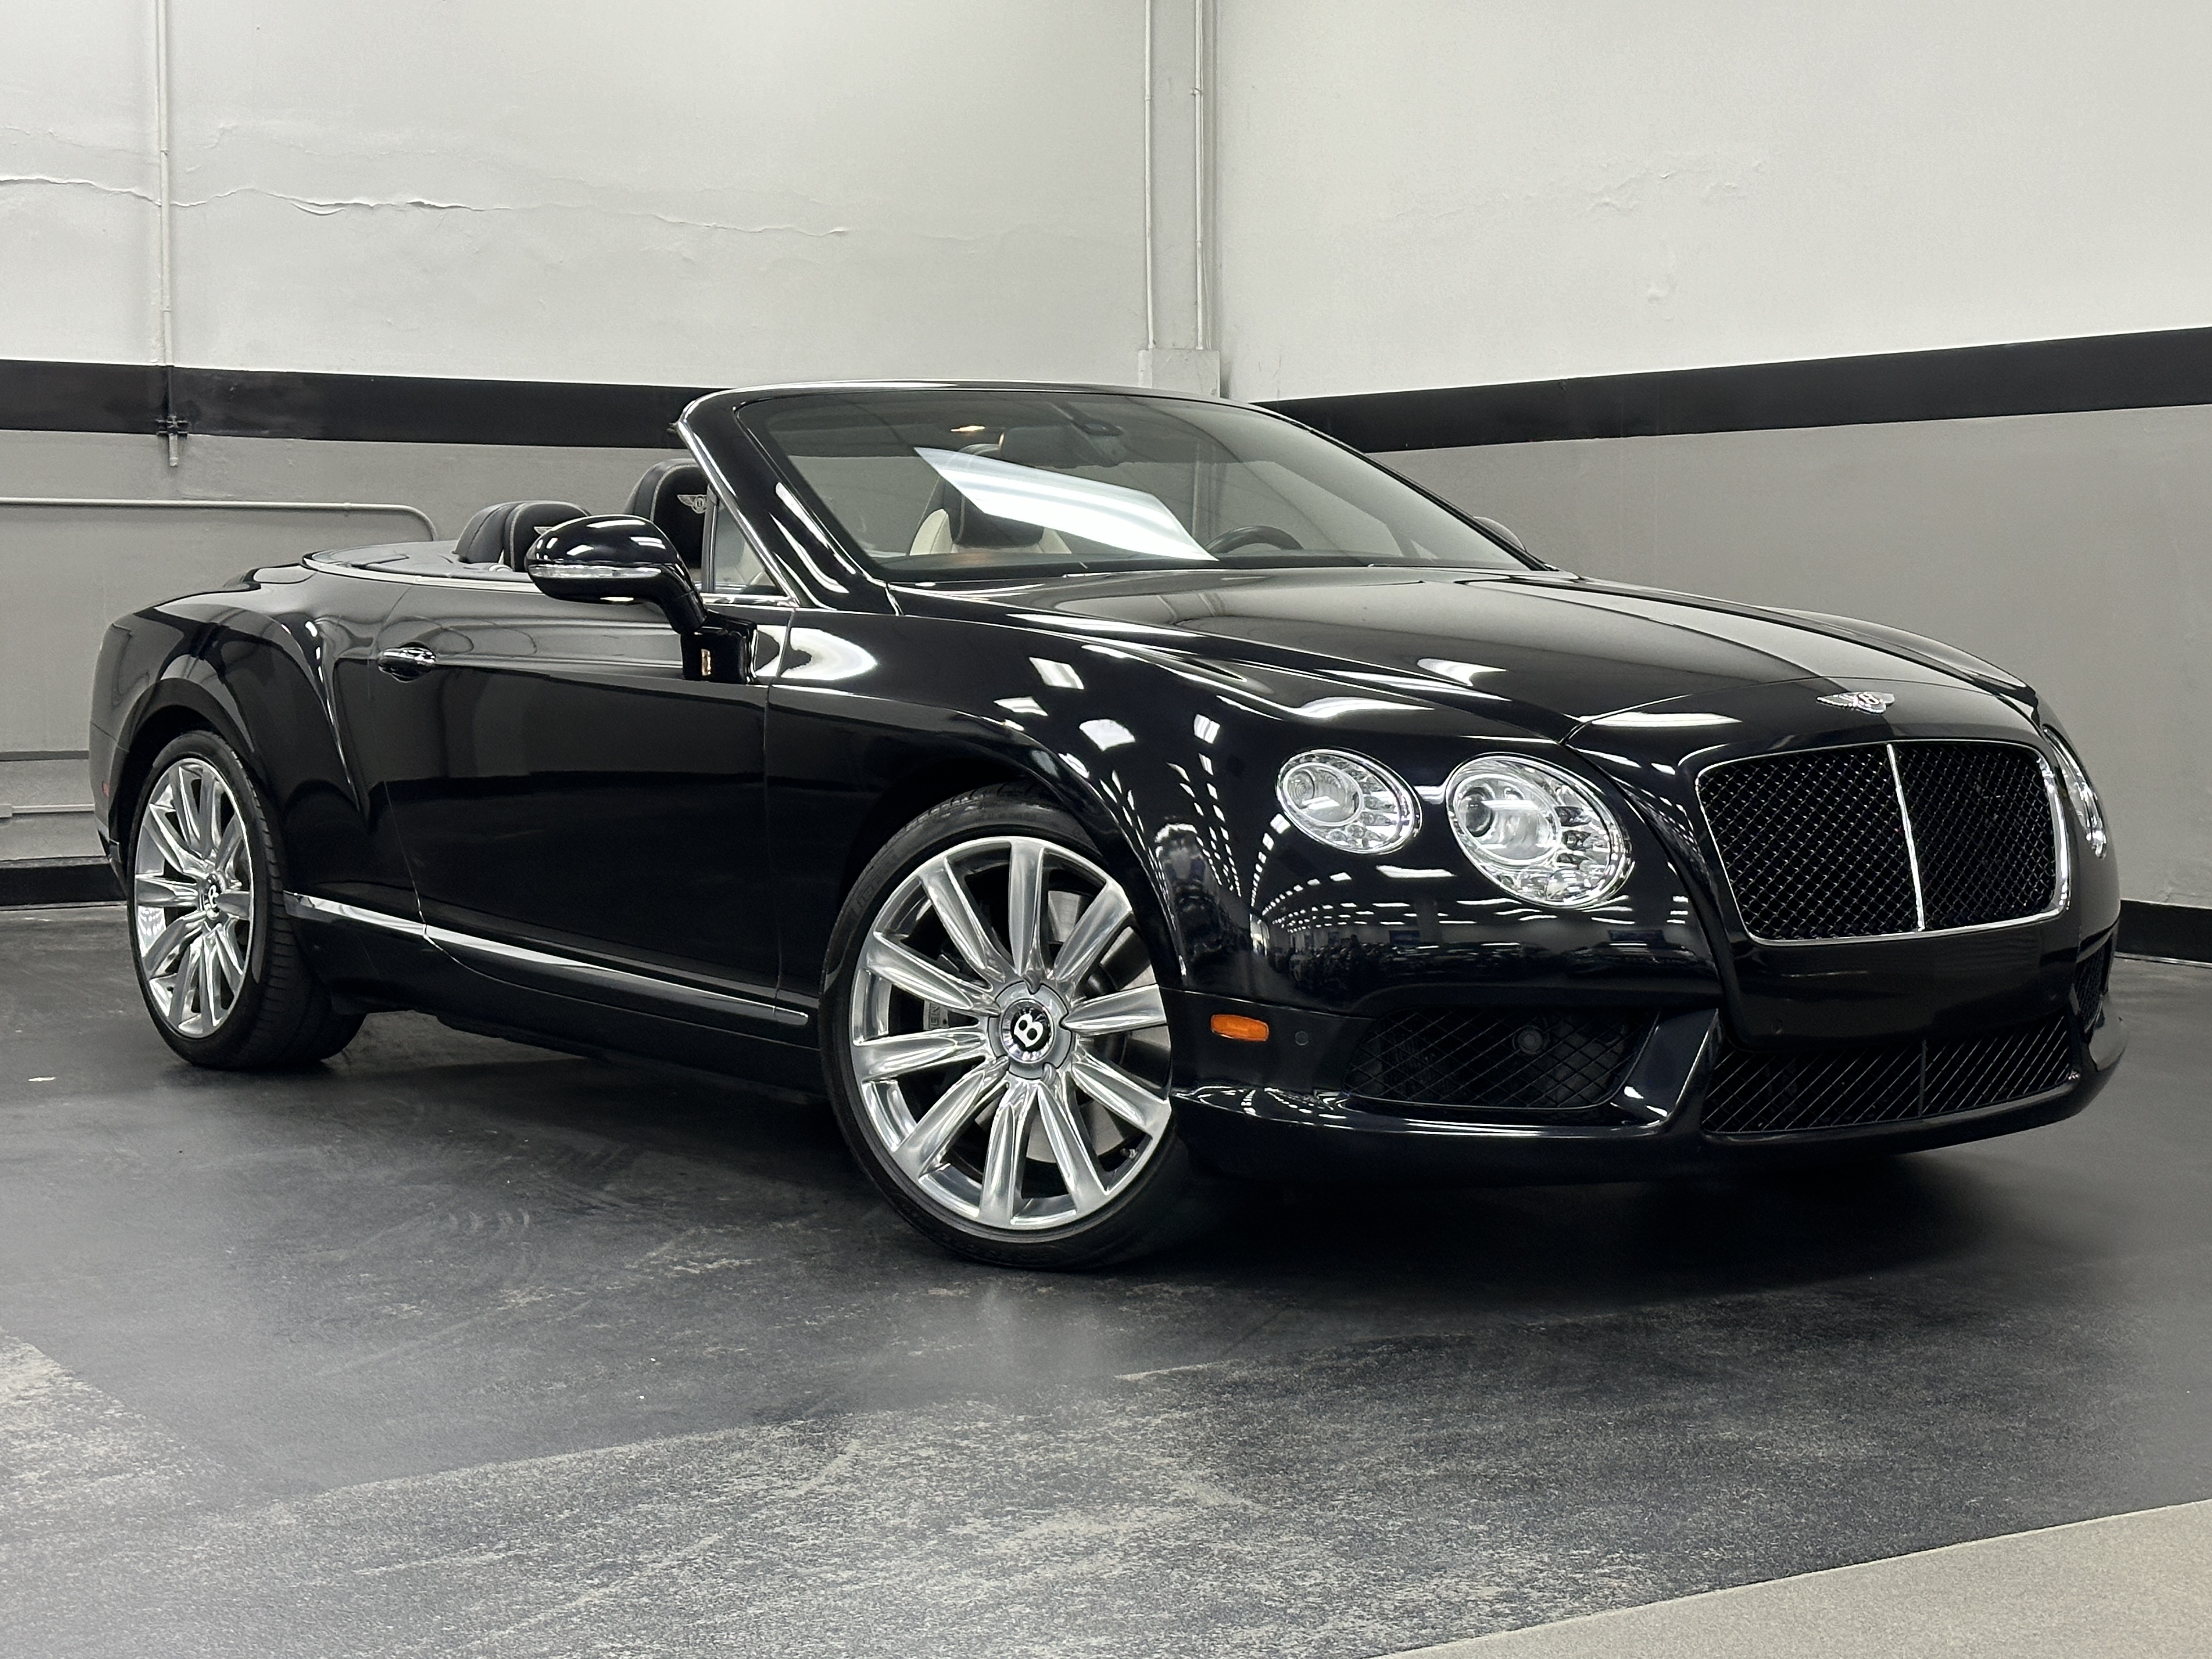 Used Bentley Cars for Sale Right Now - Autotrader